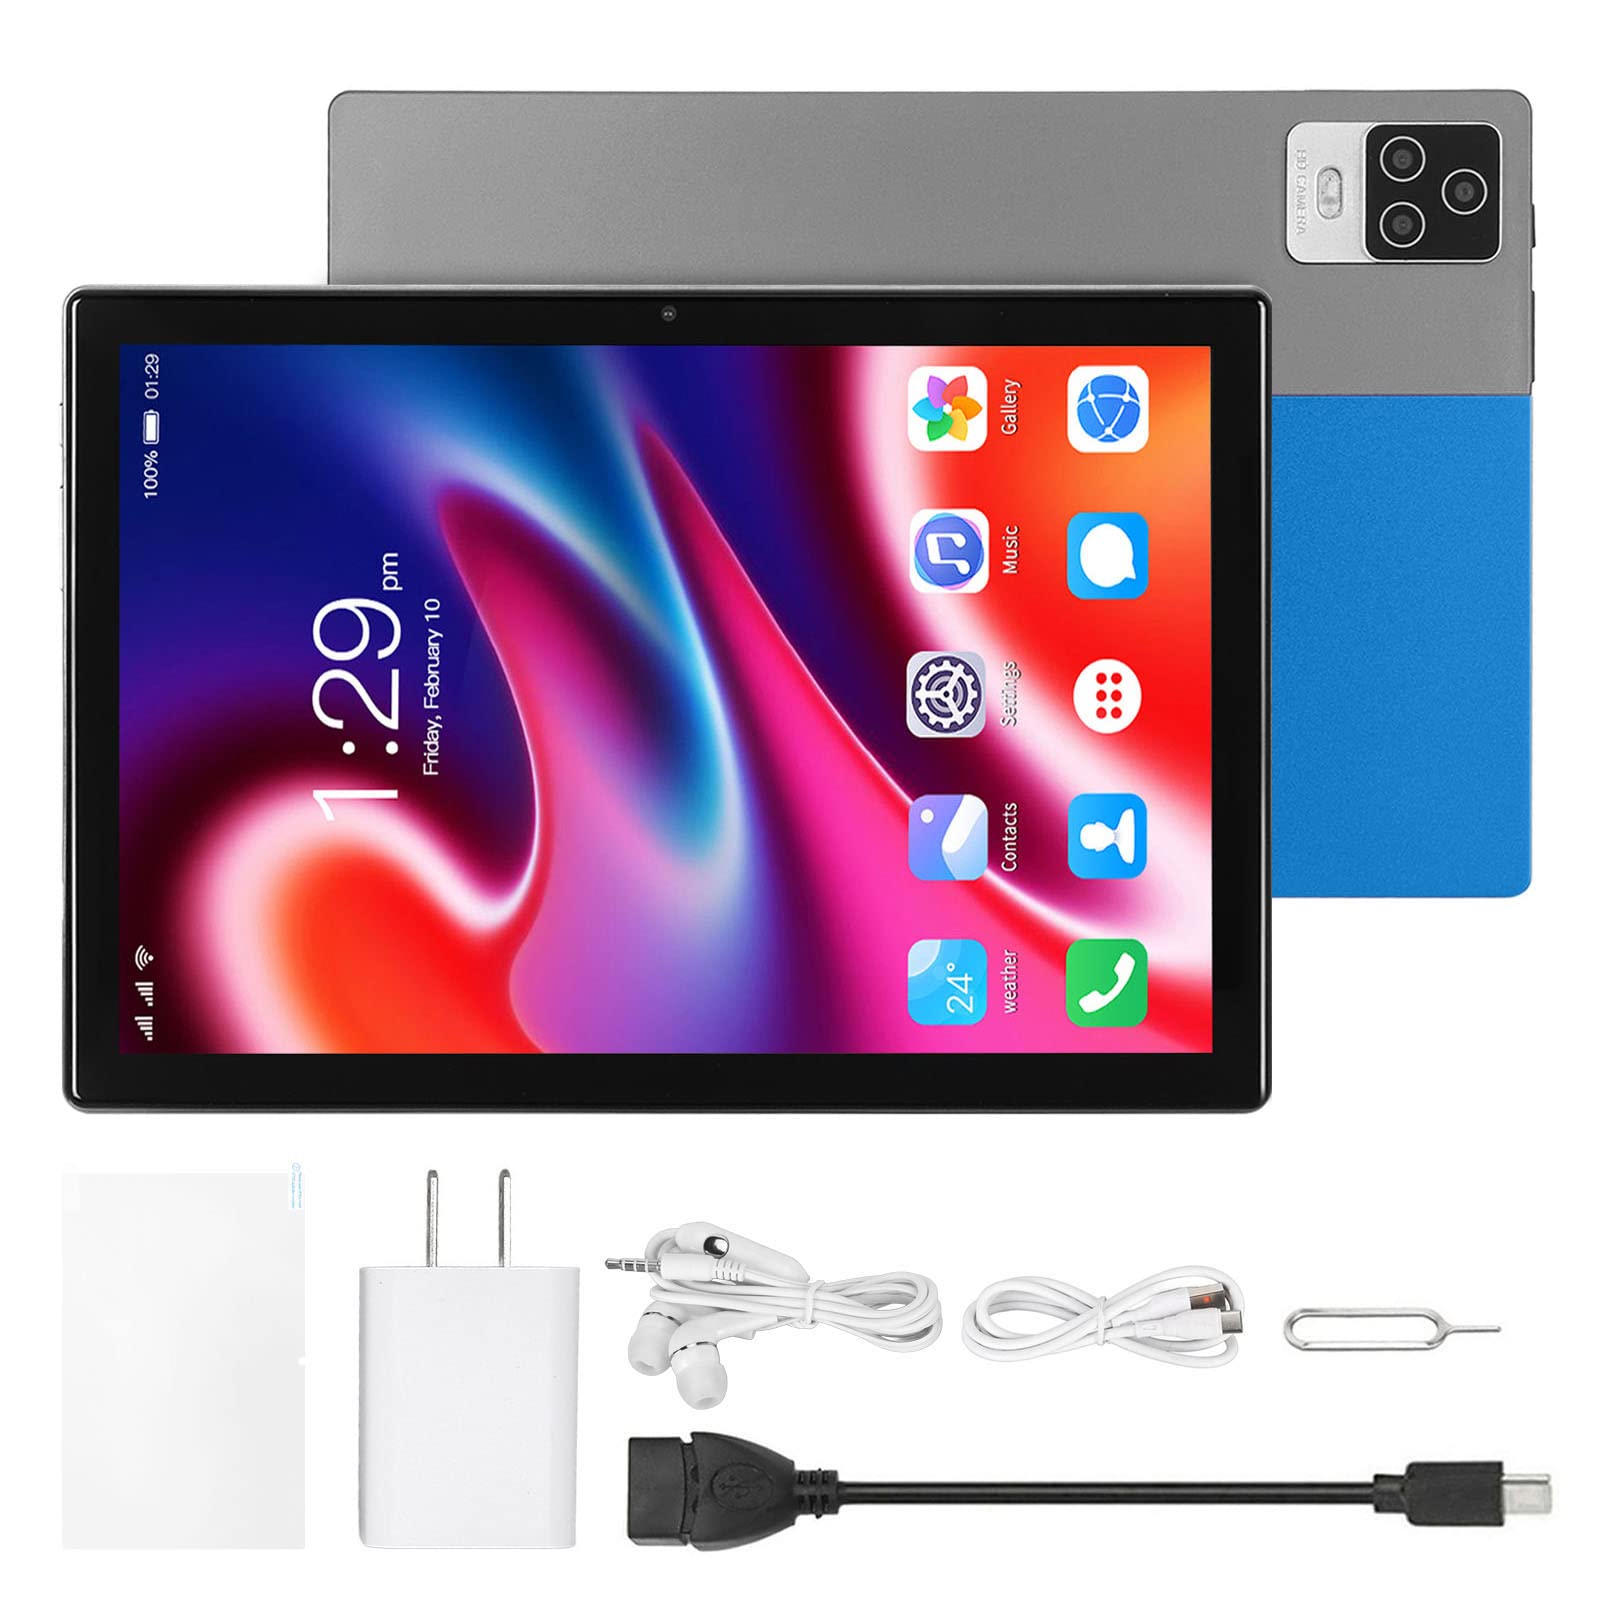 GLOGLOW Octa Core Tablet, 10.1 Inch Tablet FM GPS Function 6GB RAM 64GB ROM 4G Dual SIM Dual Standby for Watch TV for Android 11 (Blue)